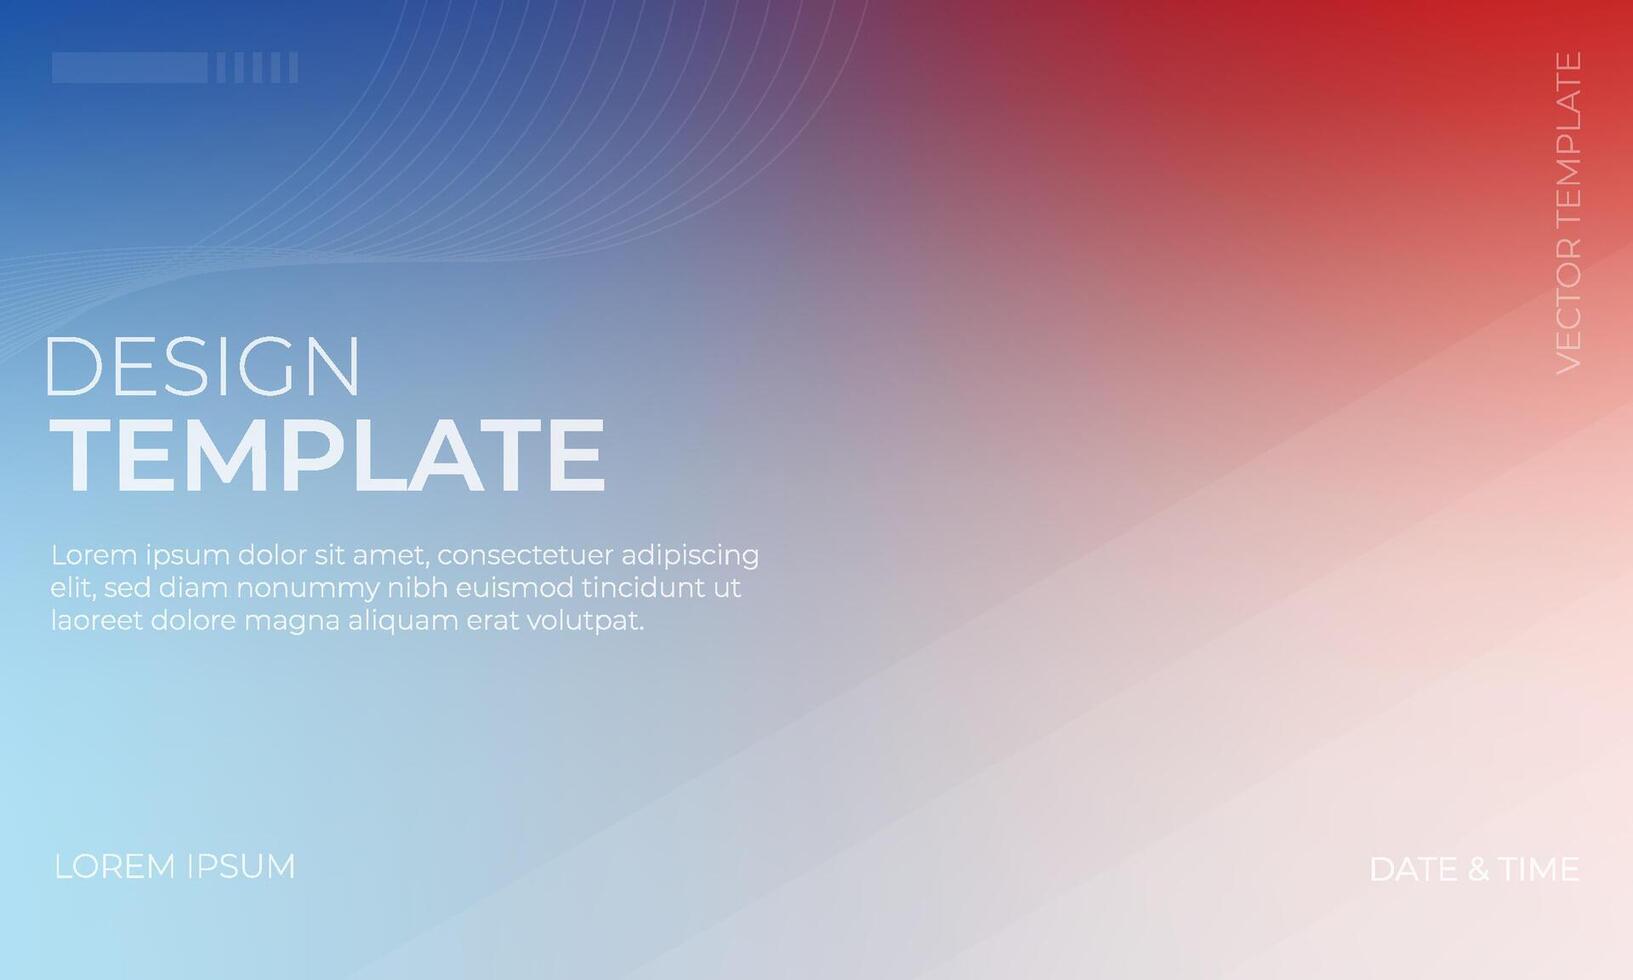 Soft Blue Red and White Gradient Background for Designs vector